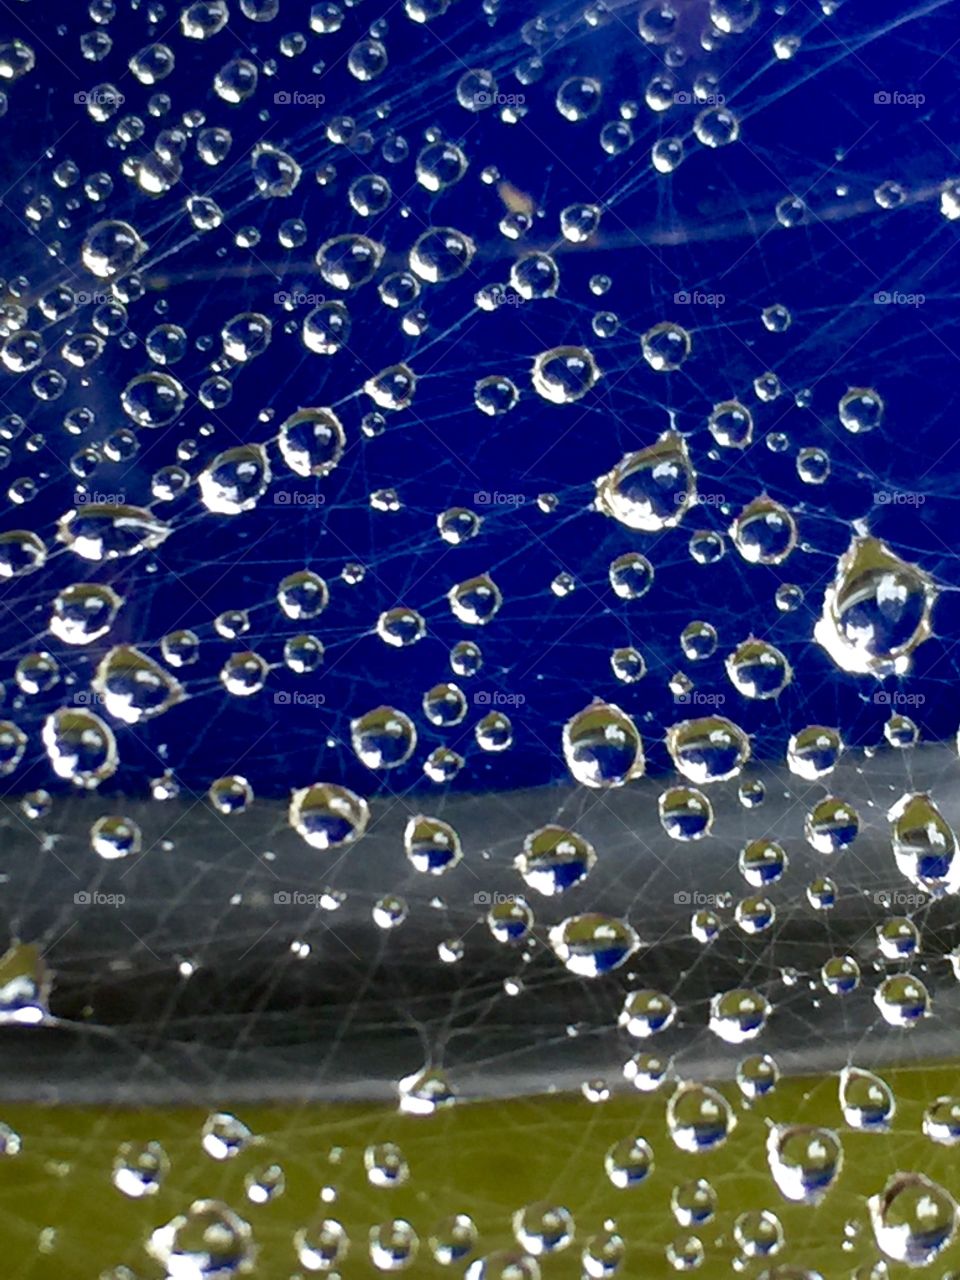 This was captured after the rain on a well constructed spider web showing each droplet that was suspended on the web